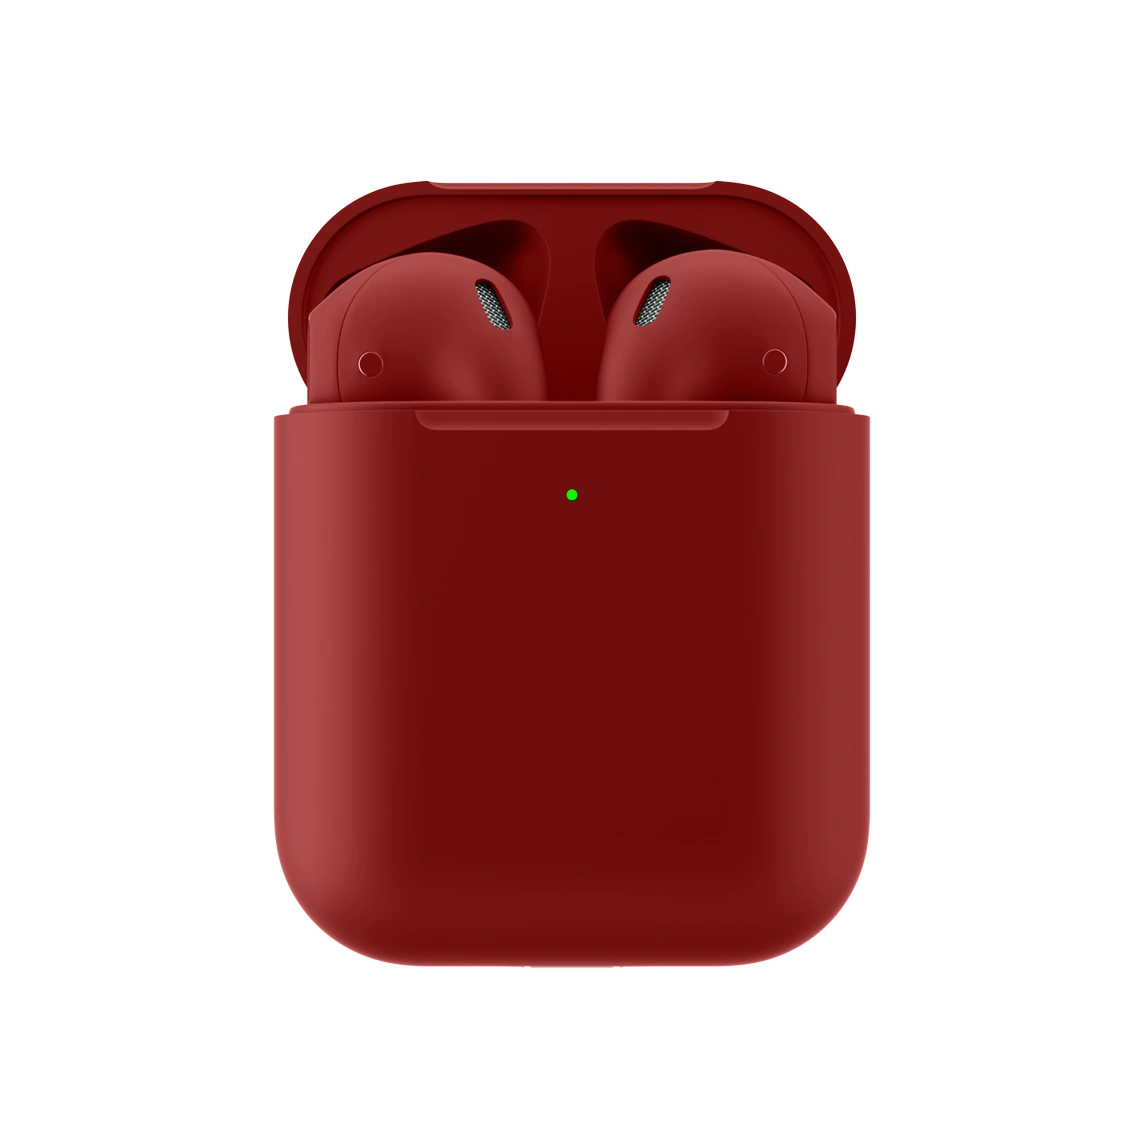 Craftby Merlin Apple Airpods 2nd Generation with Wireless Charge Case